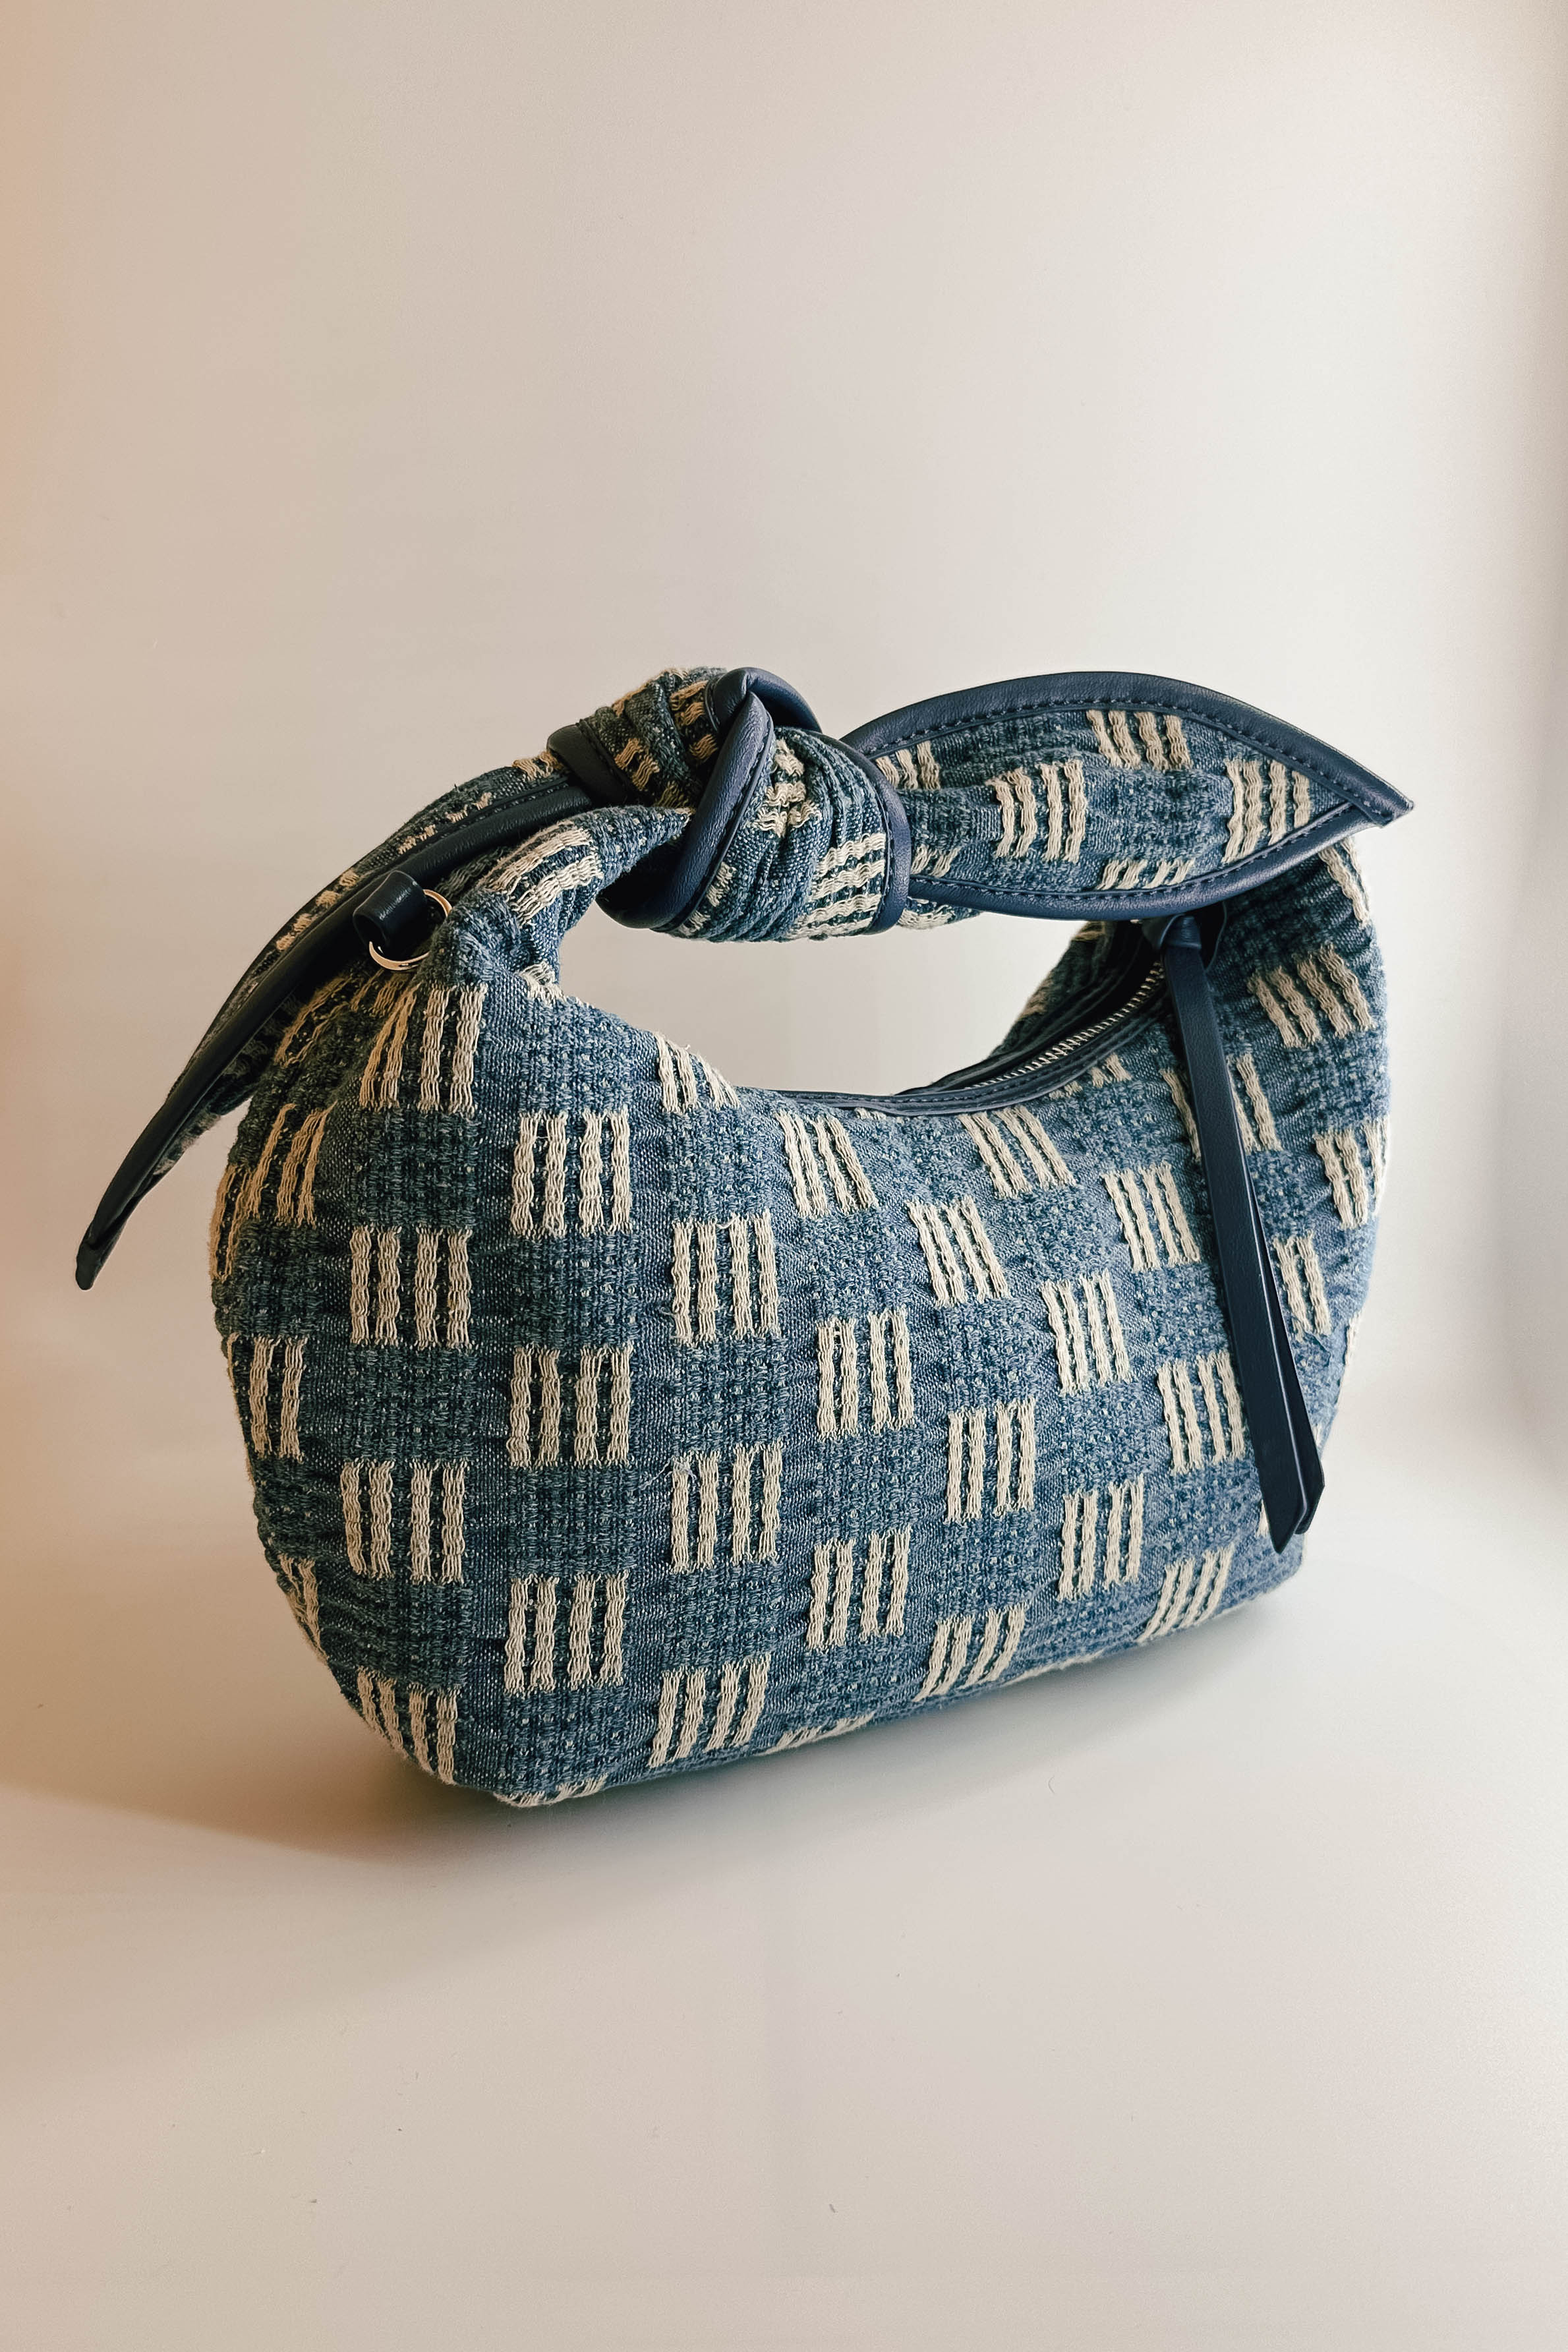 A close up front view of The Miley Denim Knot Handbag. This features a medium wash denim and tan pattern with a knot handle. There is a zipper closure along with a pocket on the inside.